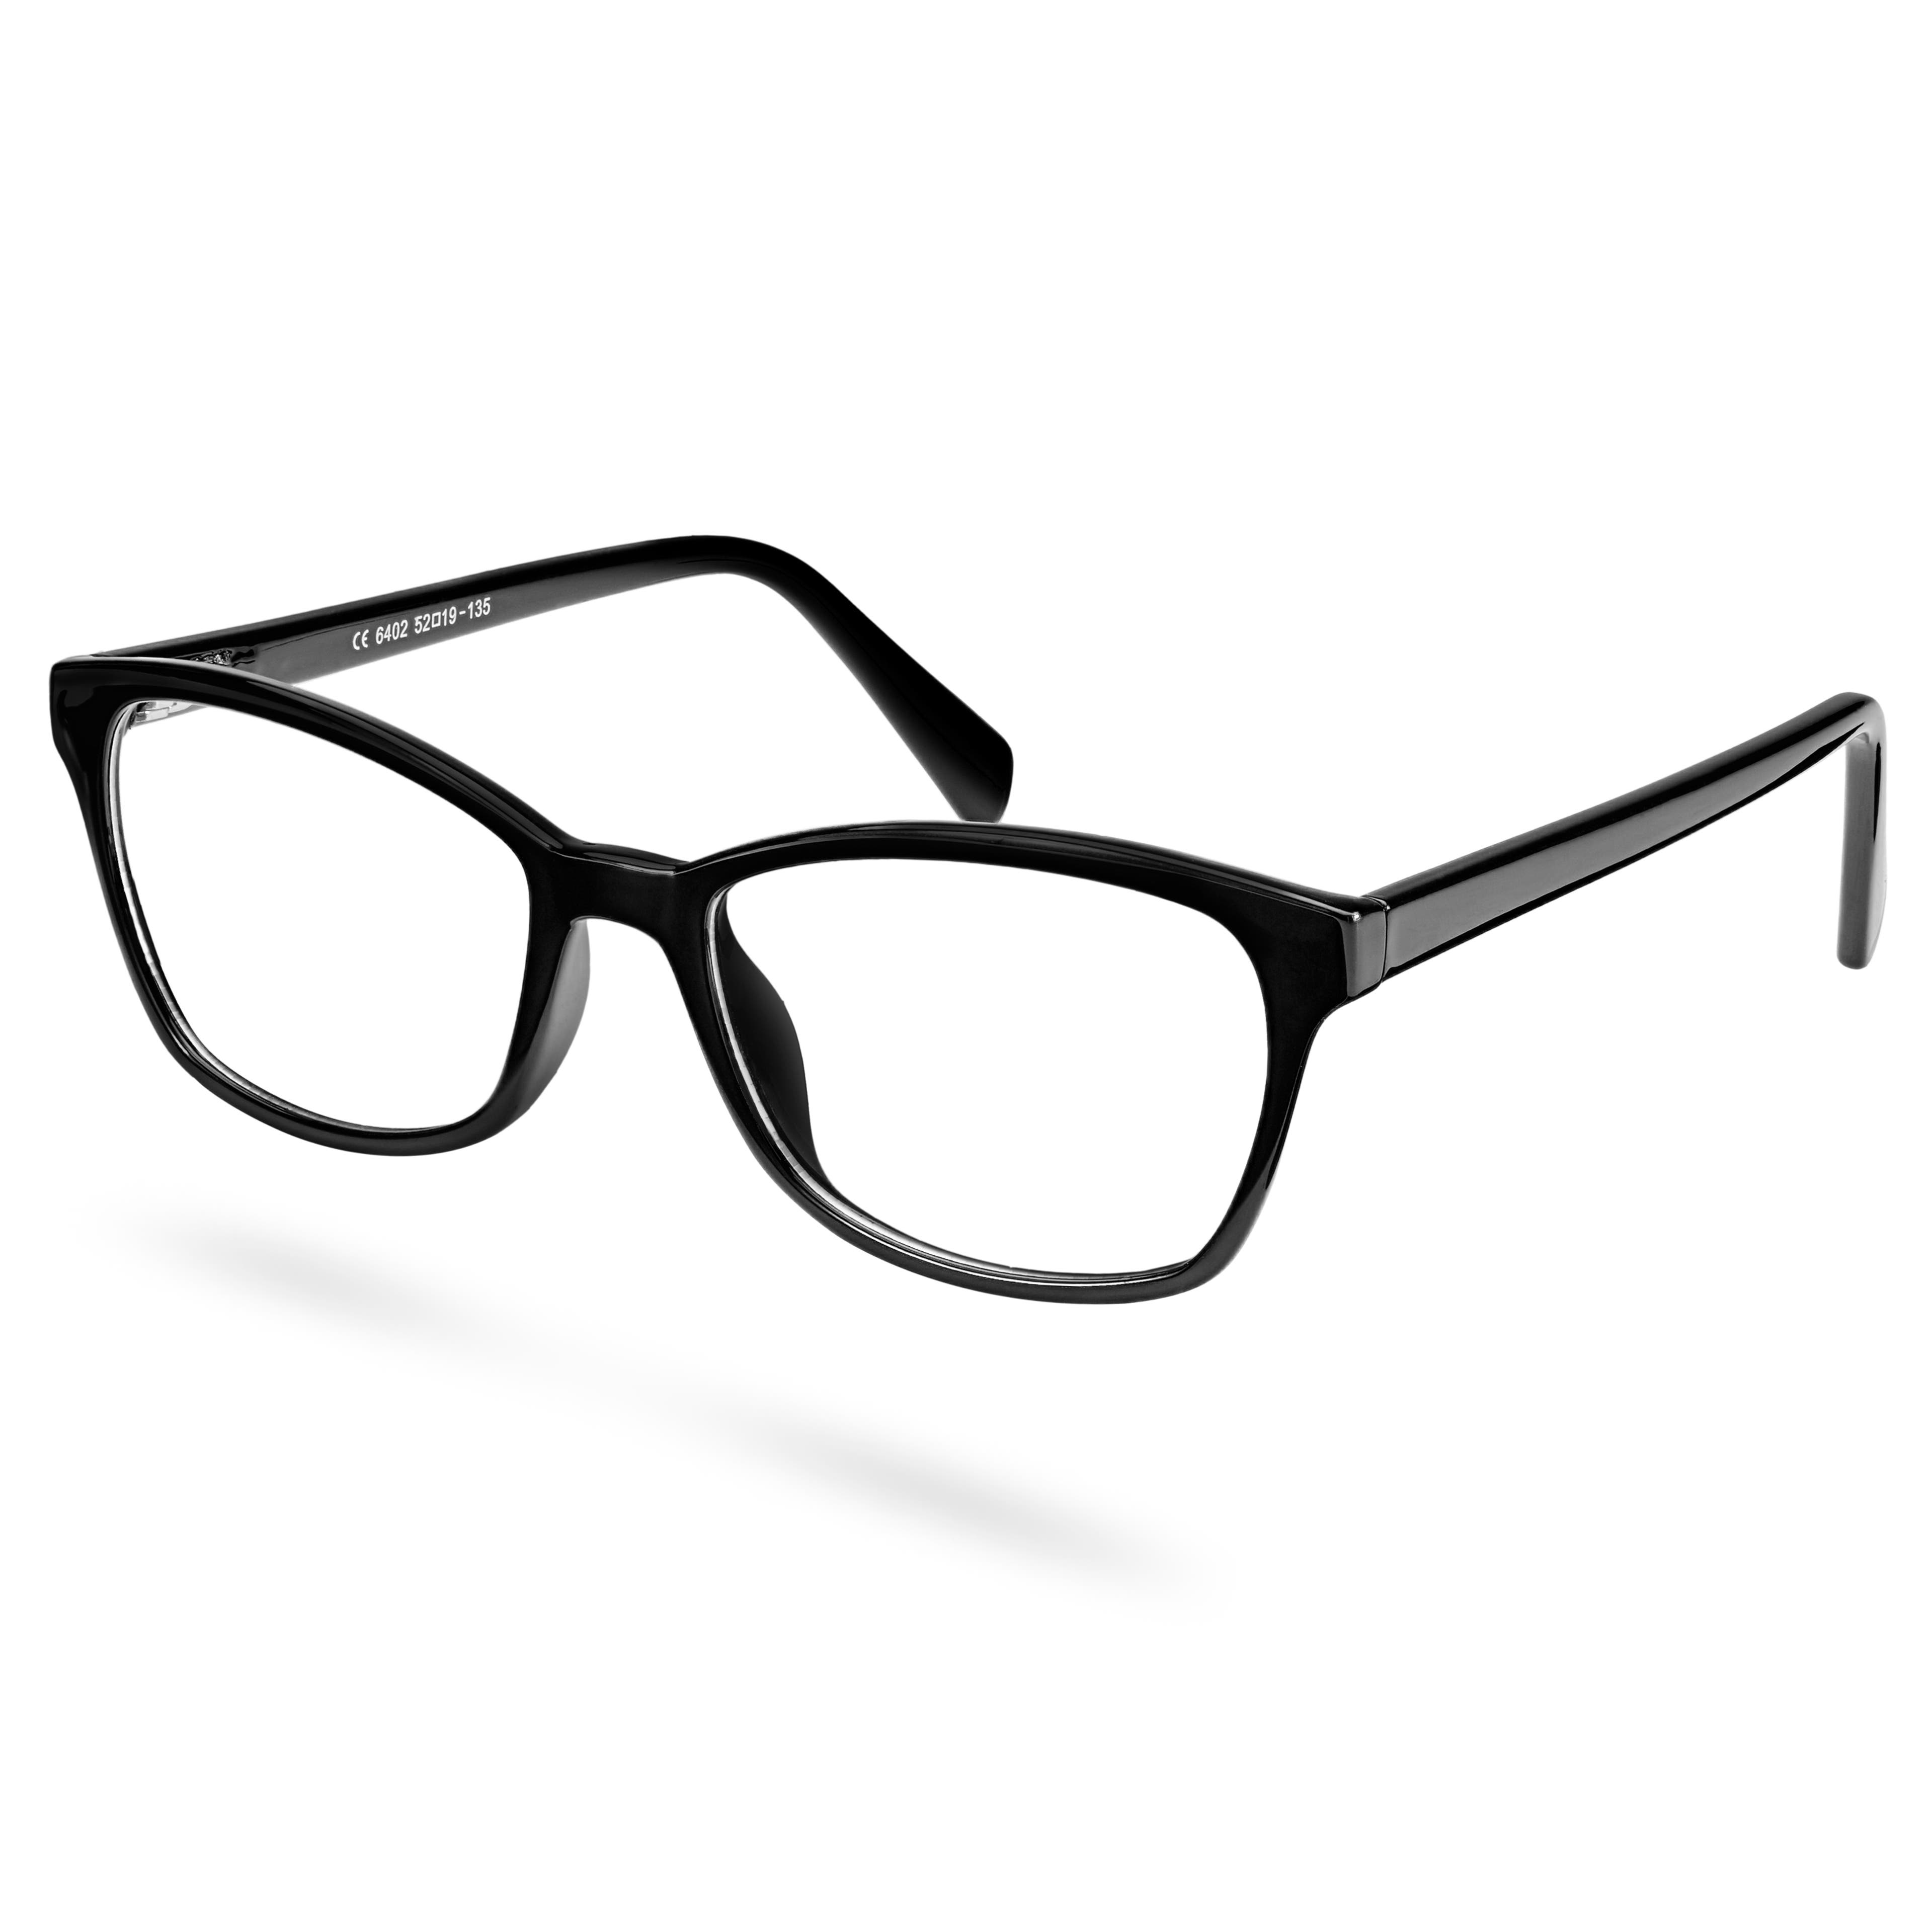 Faculty Black Clear Lens Glasses